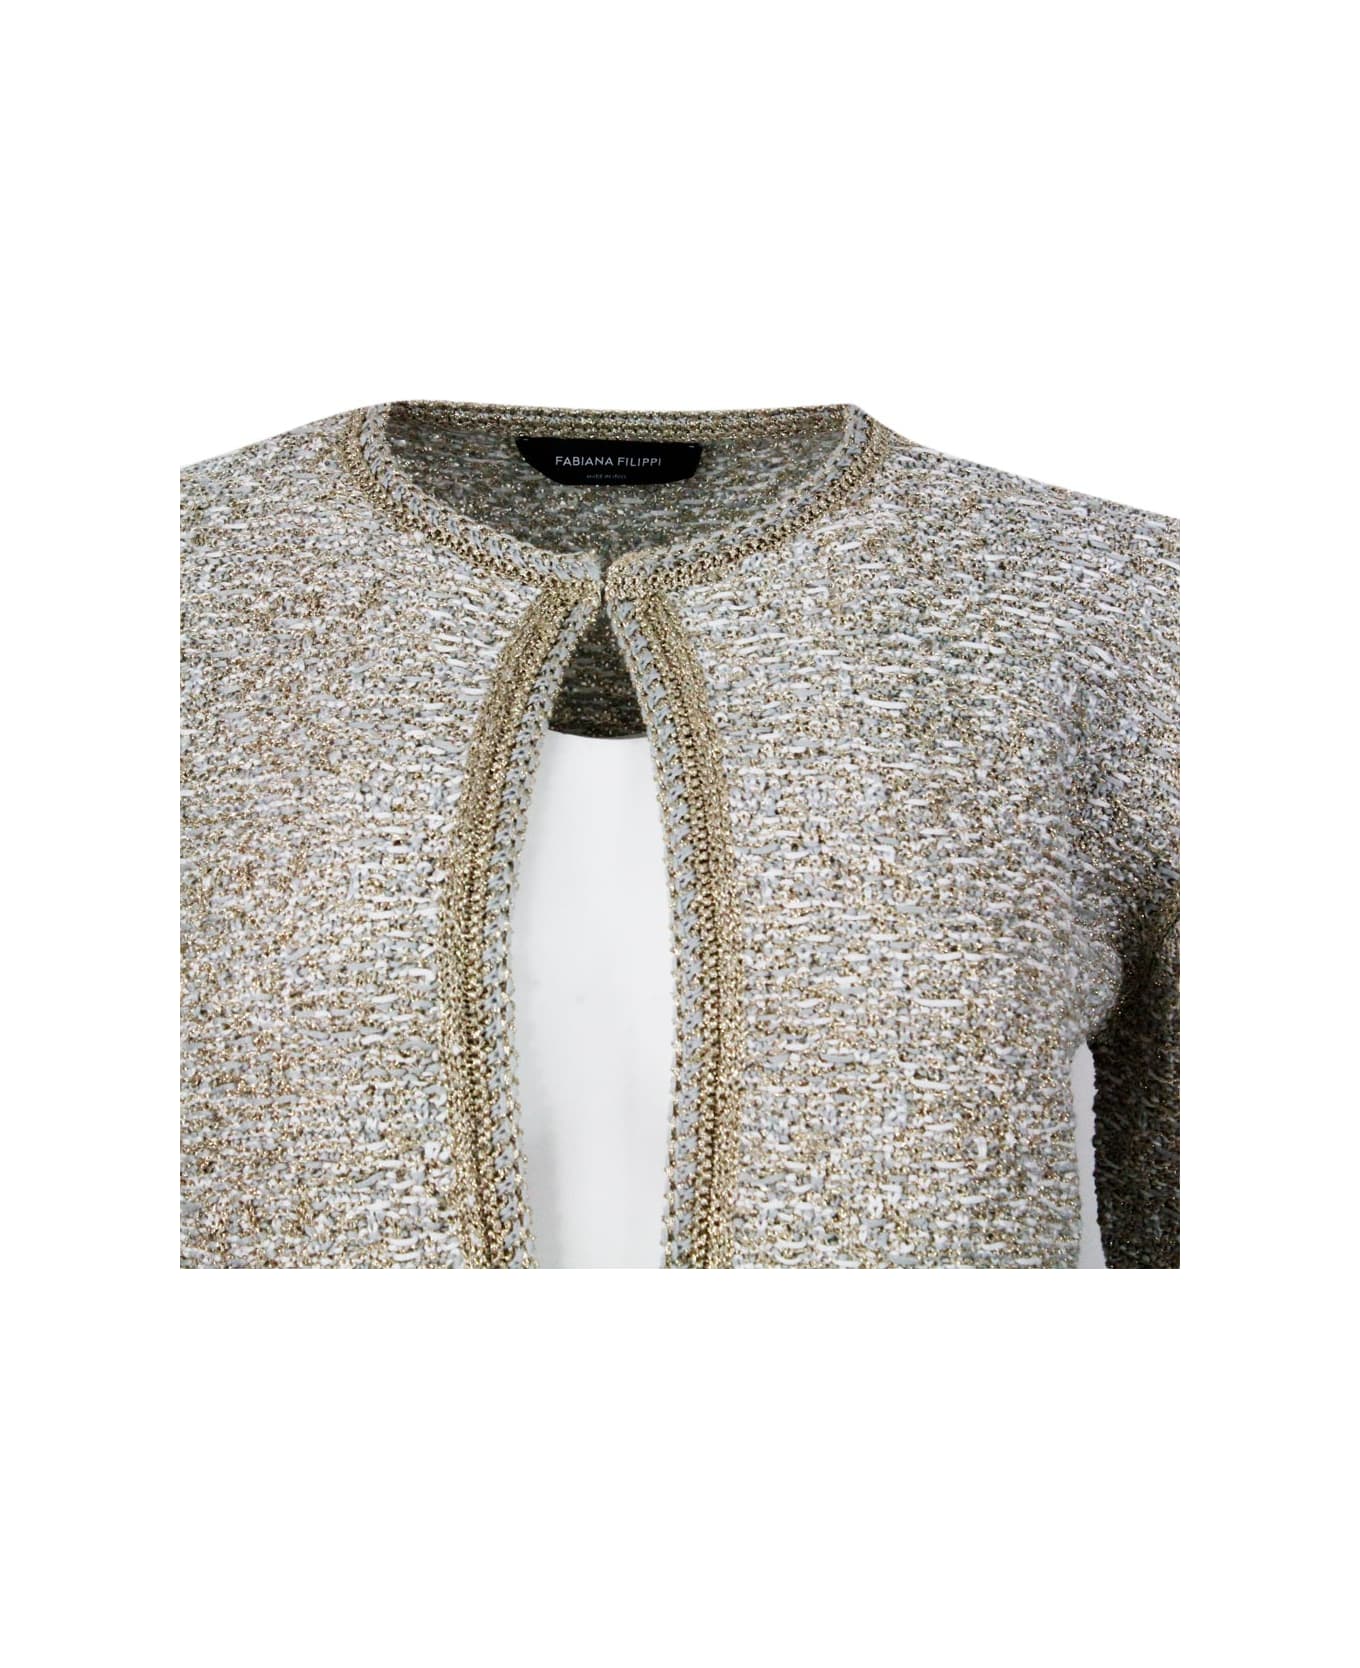 Fabiana Filippi Chanel-style Jacket Sweater Open On The Front And With Hook Closure Embellished With Bright Lurex Threads - Gold